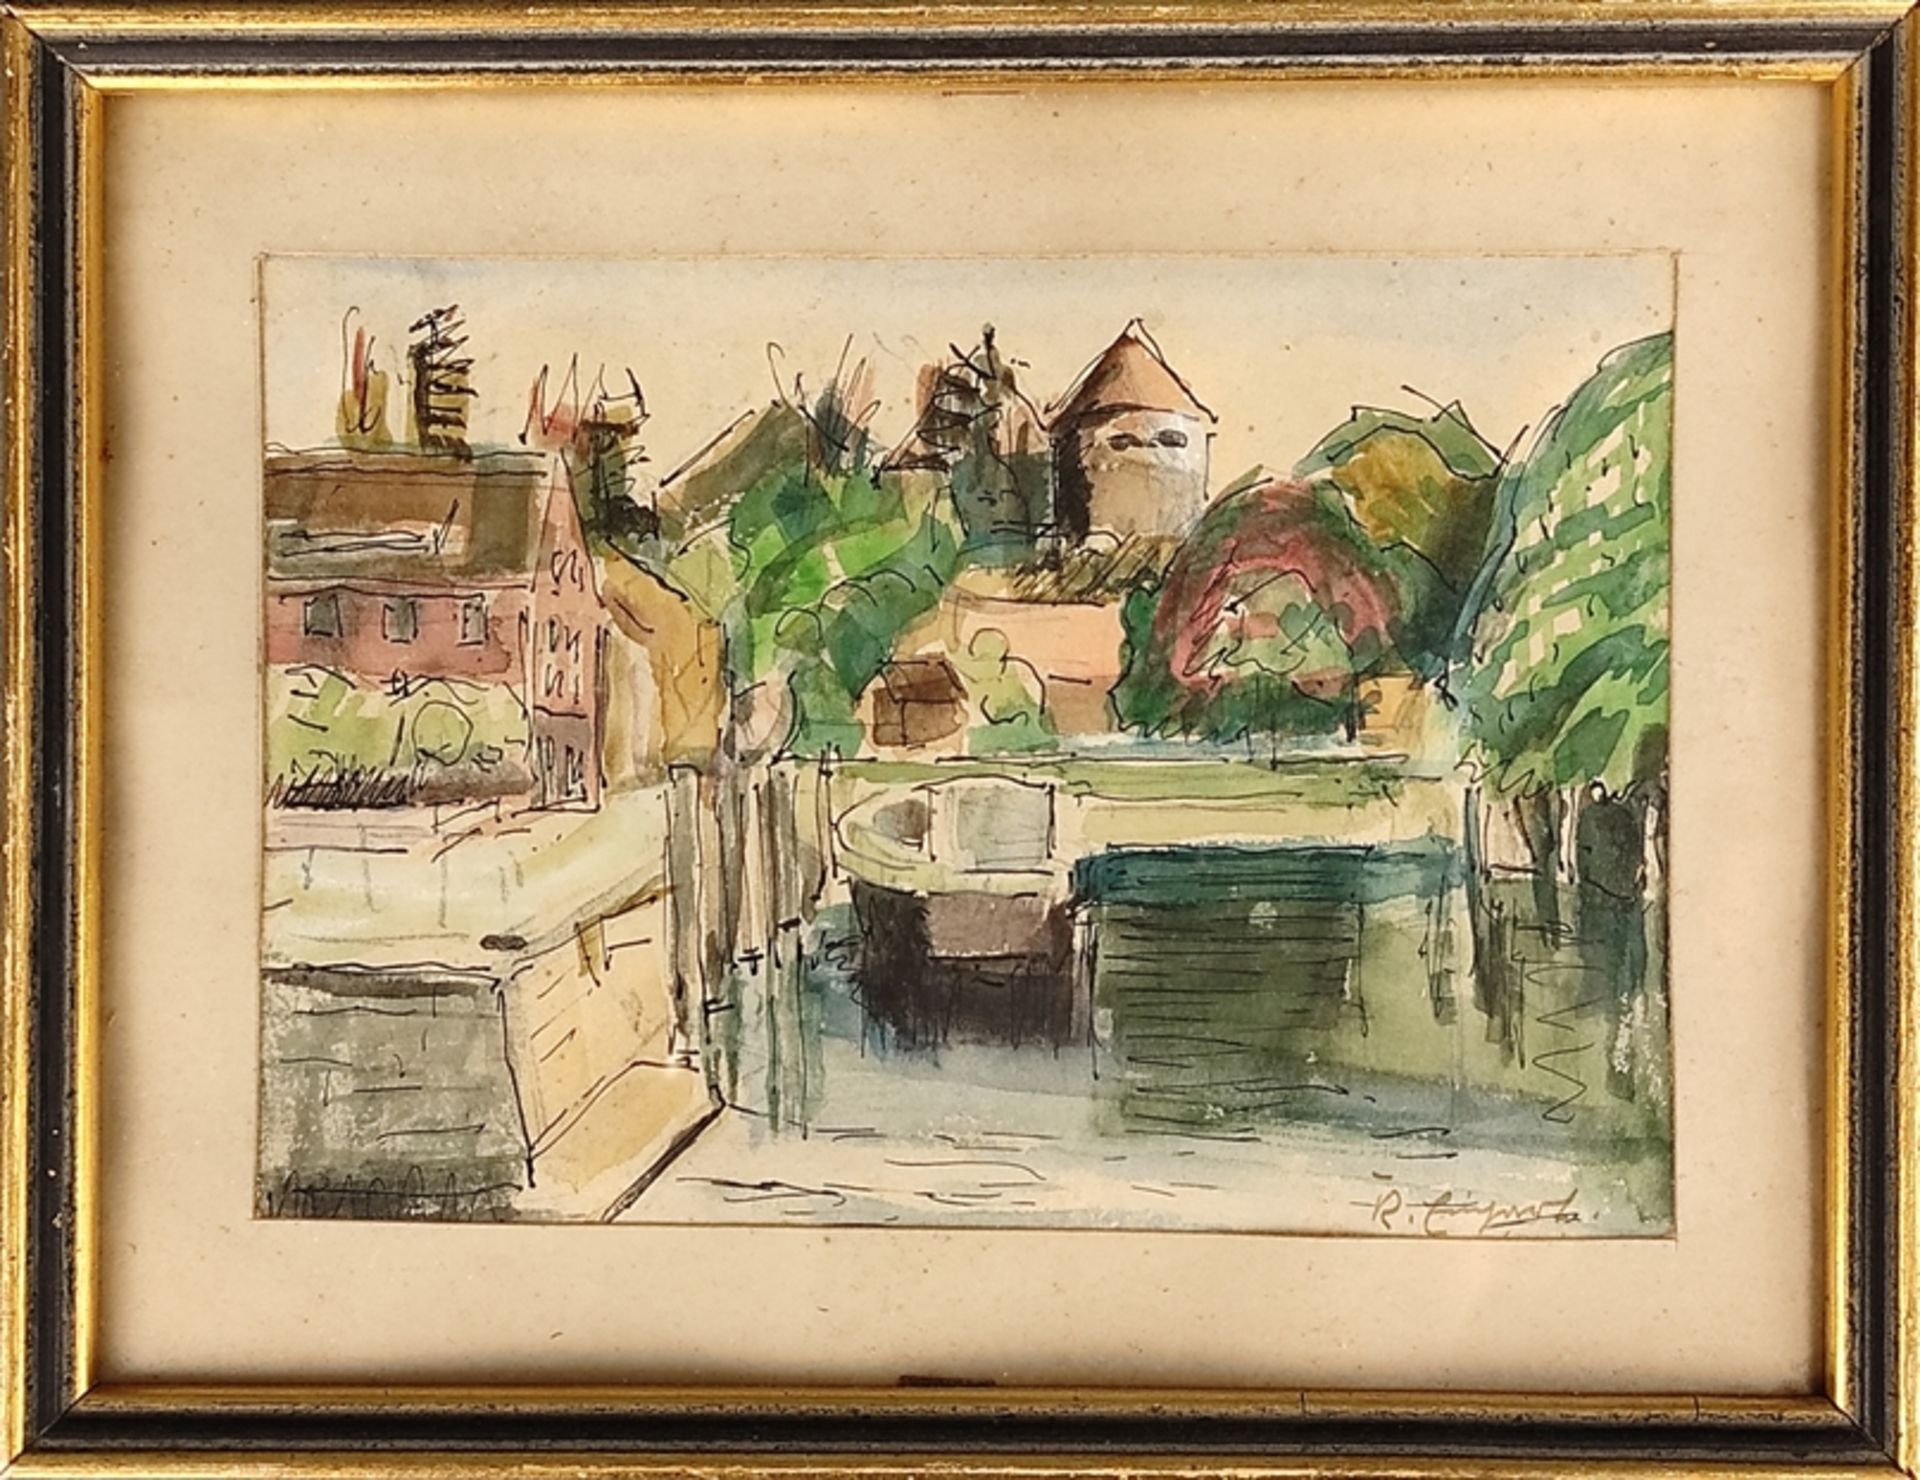 Einhart, Karl (1884-1967 Constance) "Small harbor in Überlingen", watercolor drawing on paper, sign - Image 2 of 4